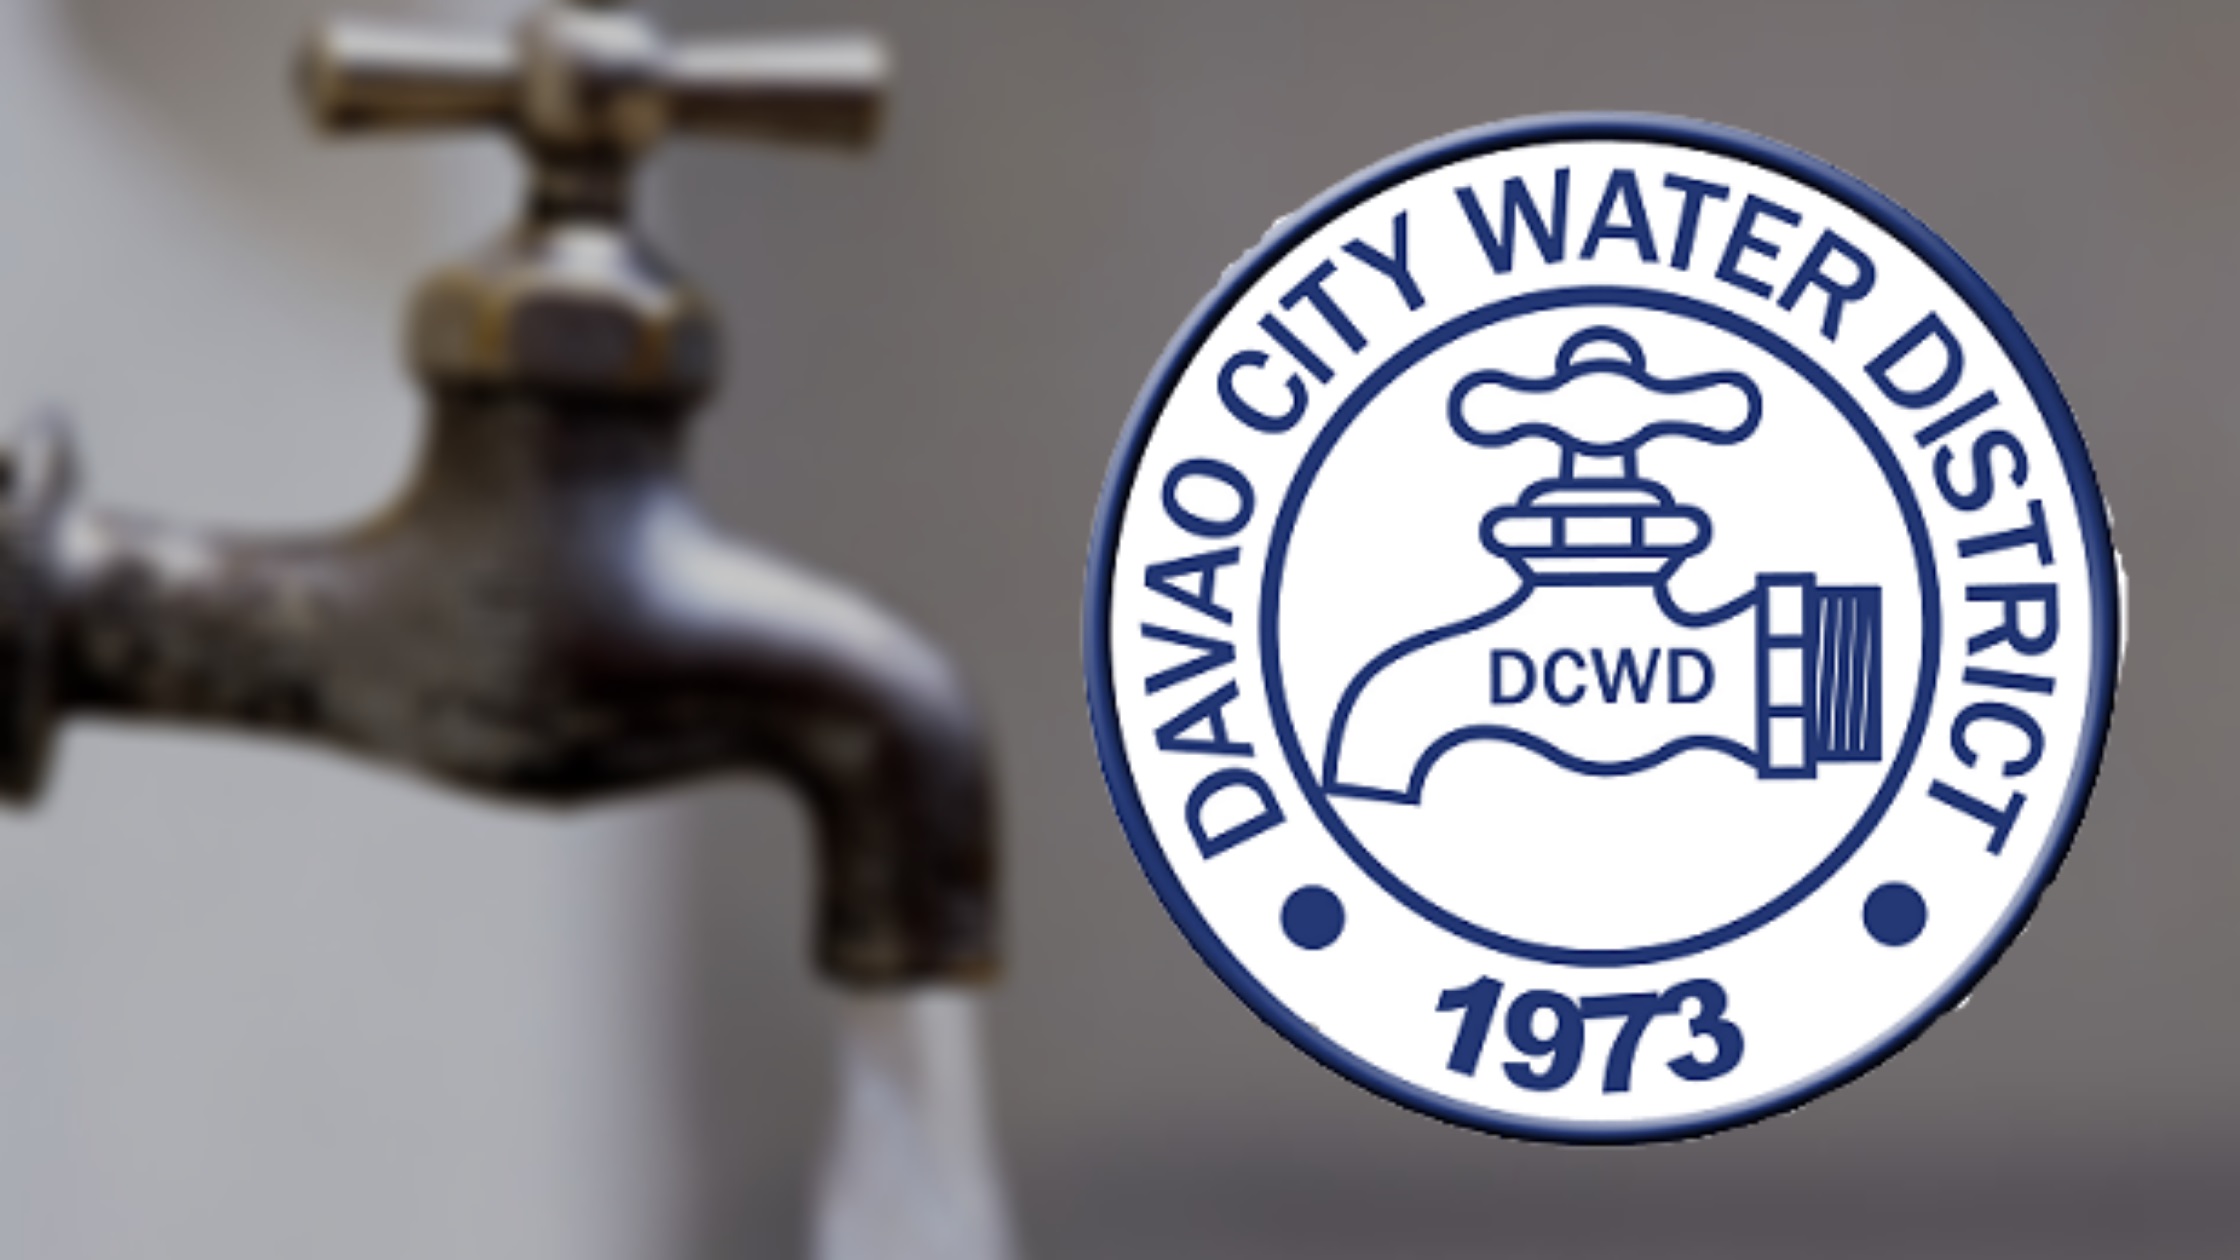 pay newton county water bill online